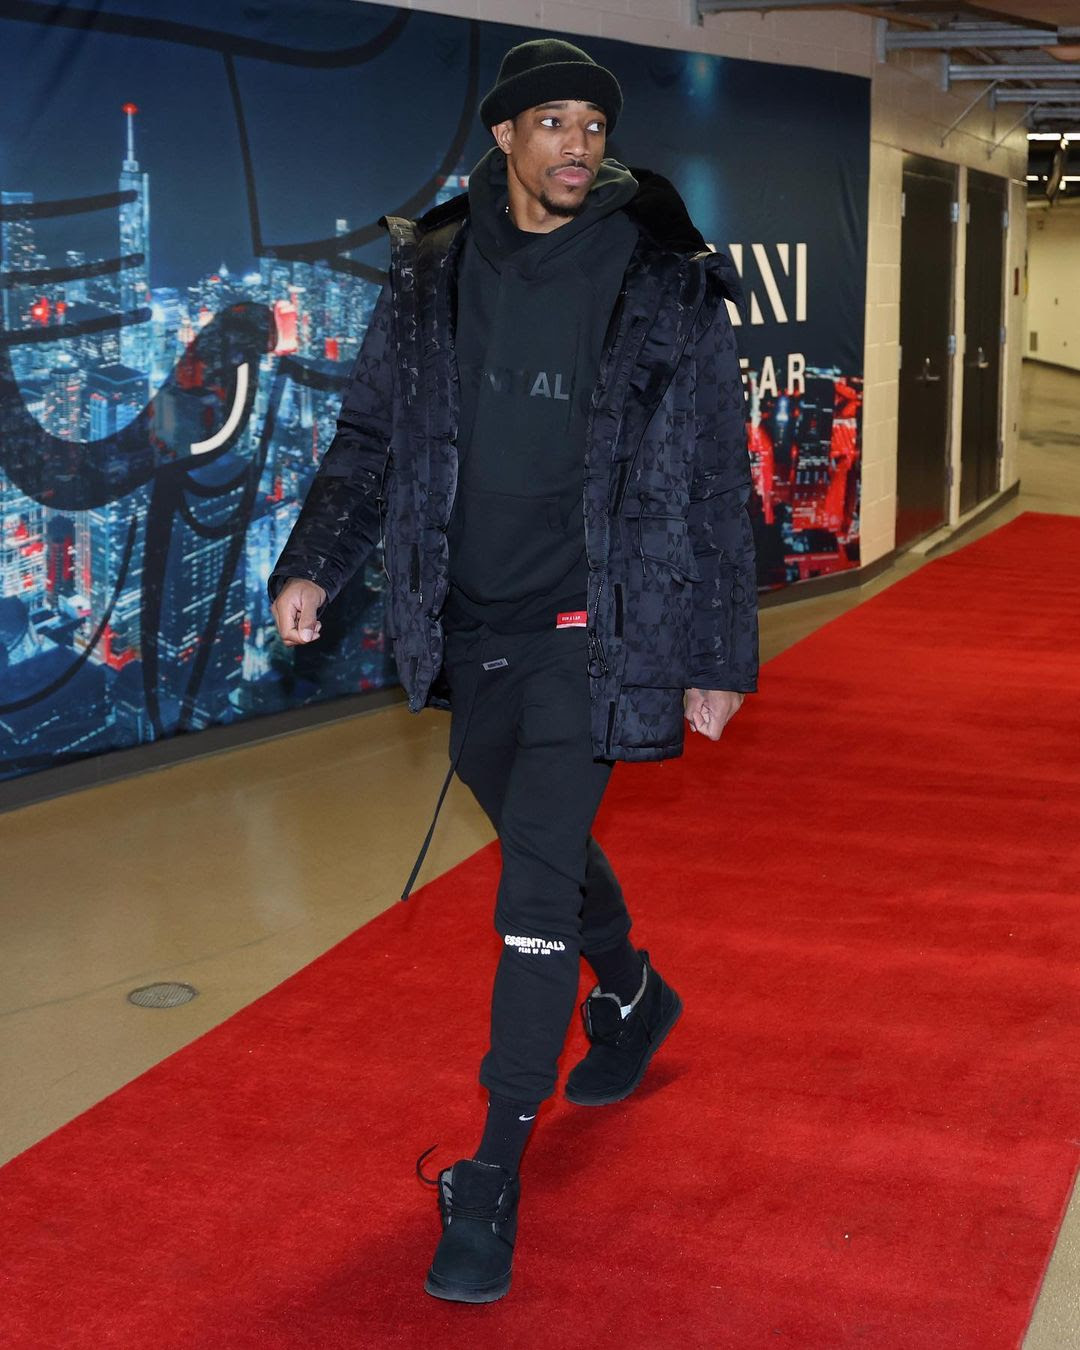 WHERE DO I COP? This Week’s Top NBA Fits from LeagueFits